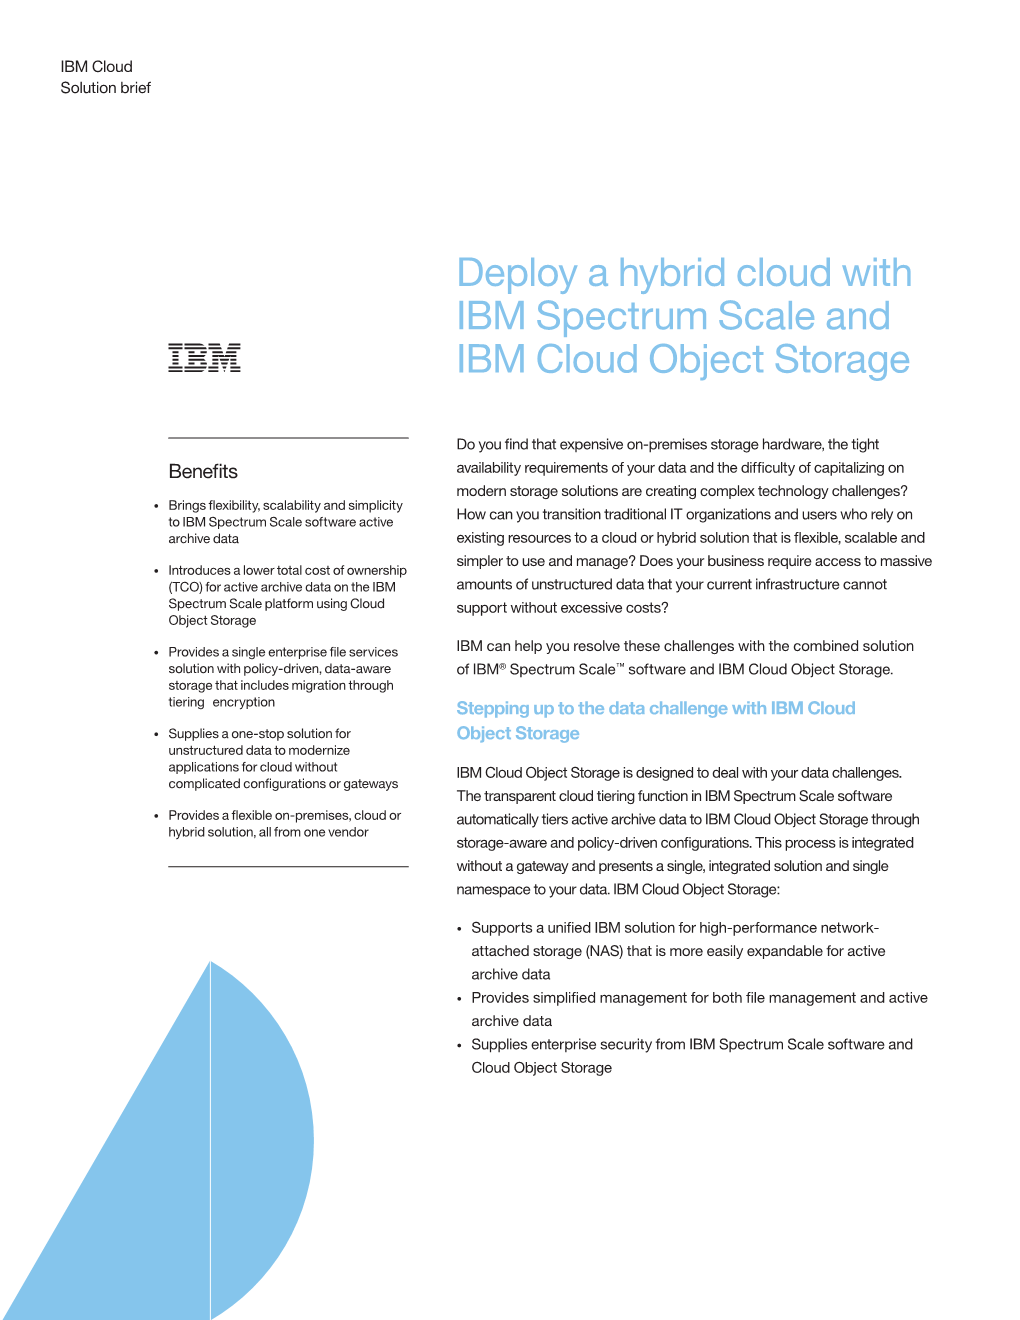 Deploy a Hybrid Cloud with IBM Spectrum Scale and IBM Cloud Object Storage